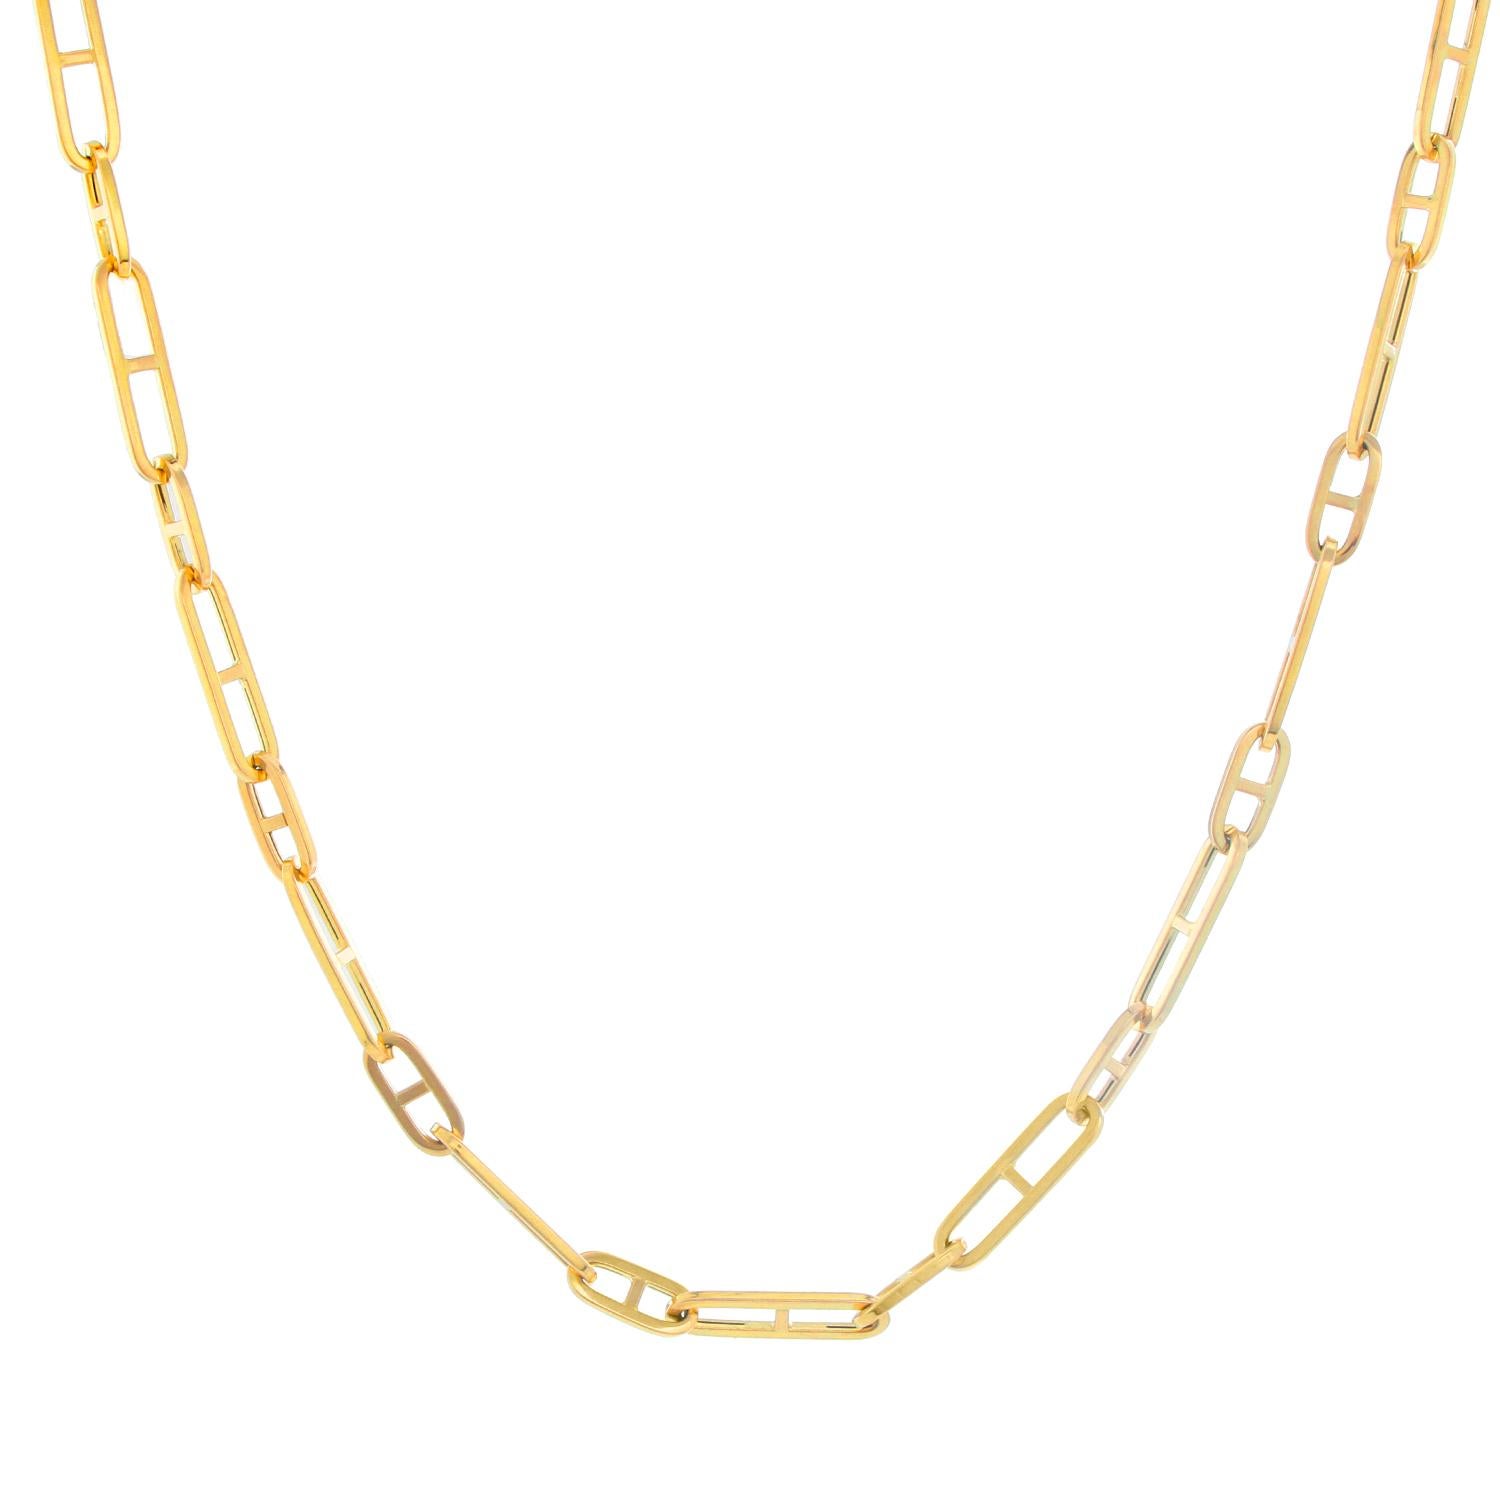 Women's or Men's 14 Karat Yellow Gold Mariner Link with Bar Chain Necklace